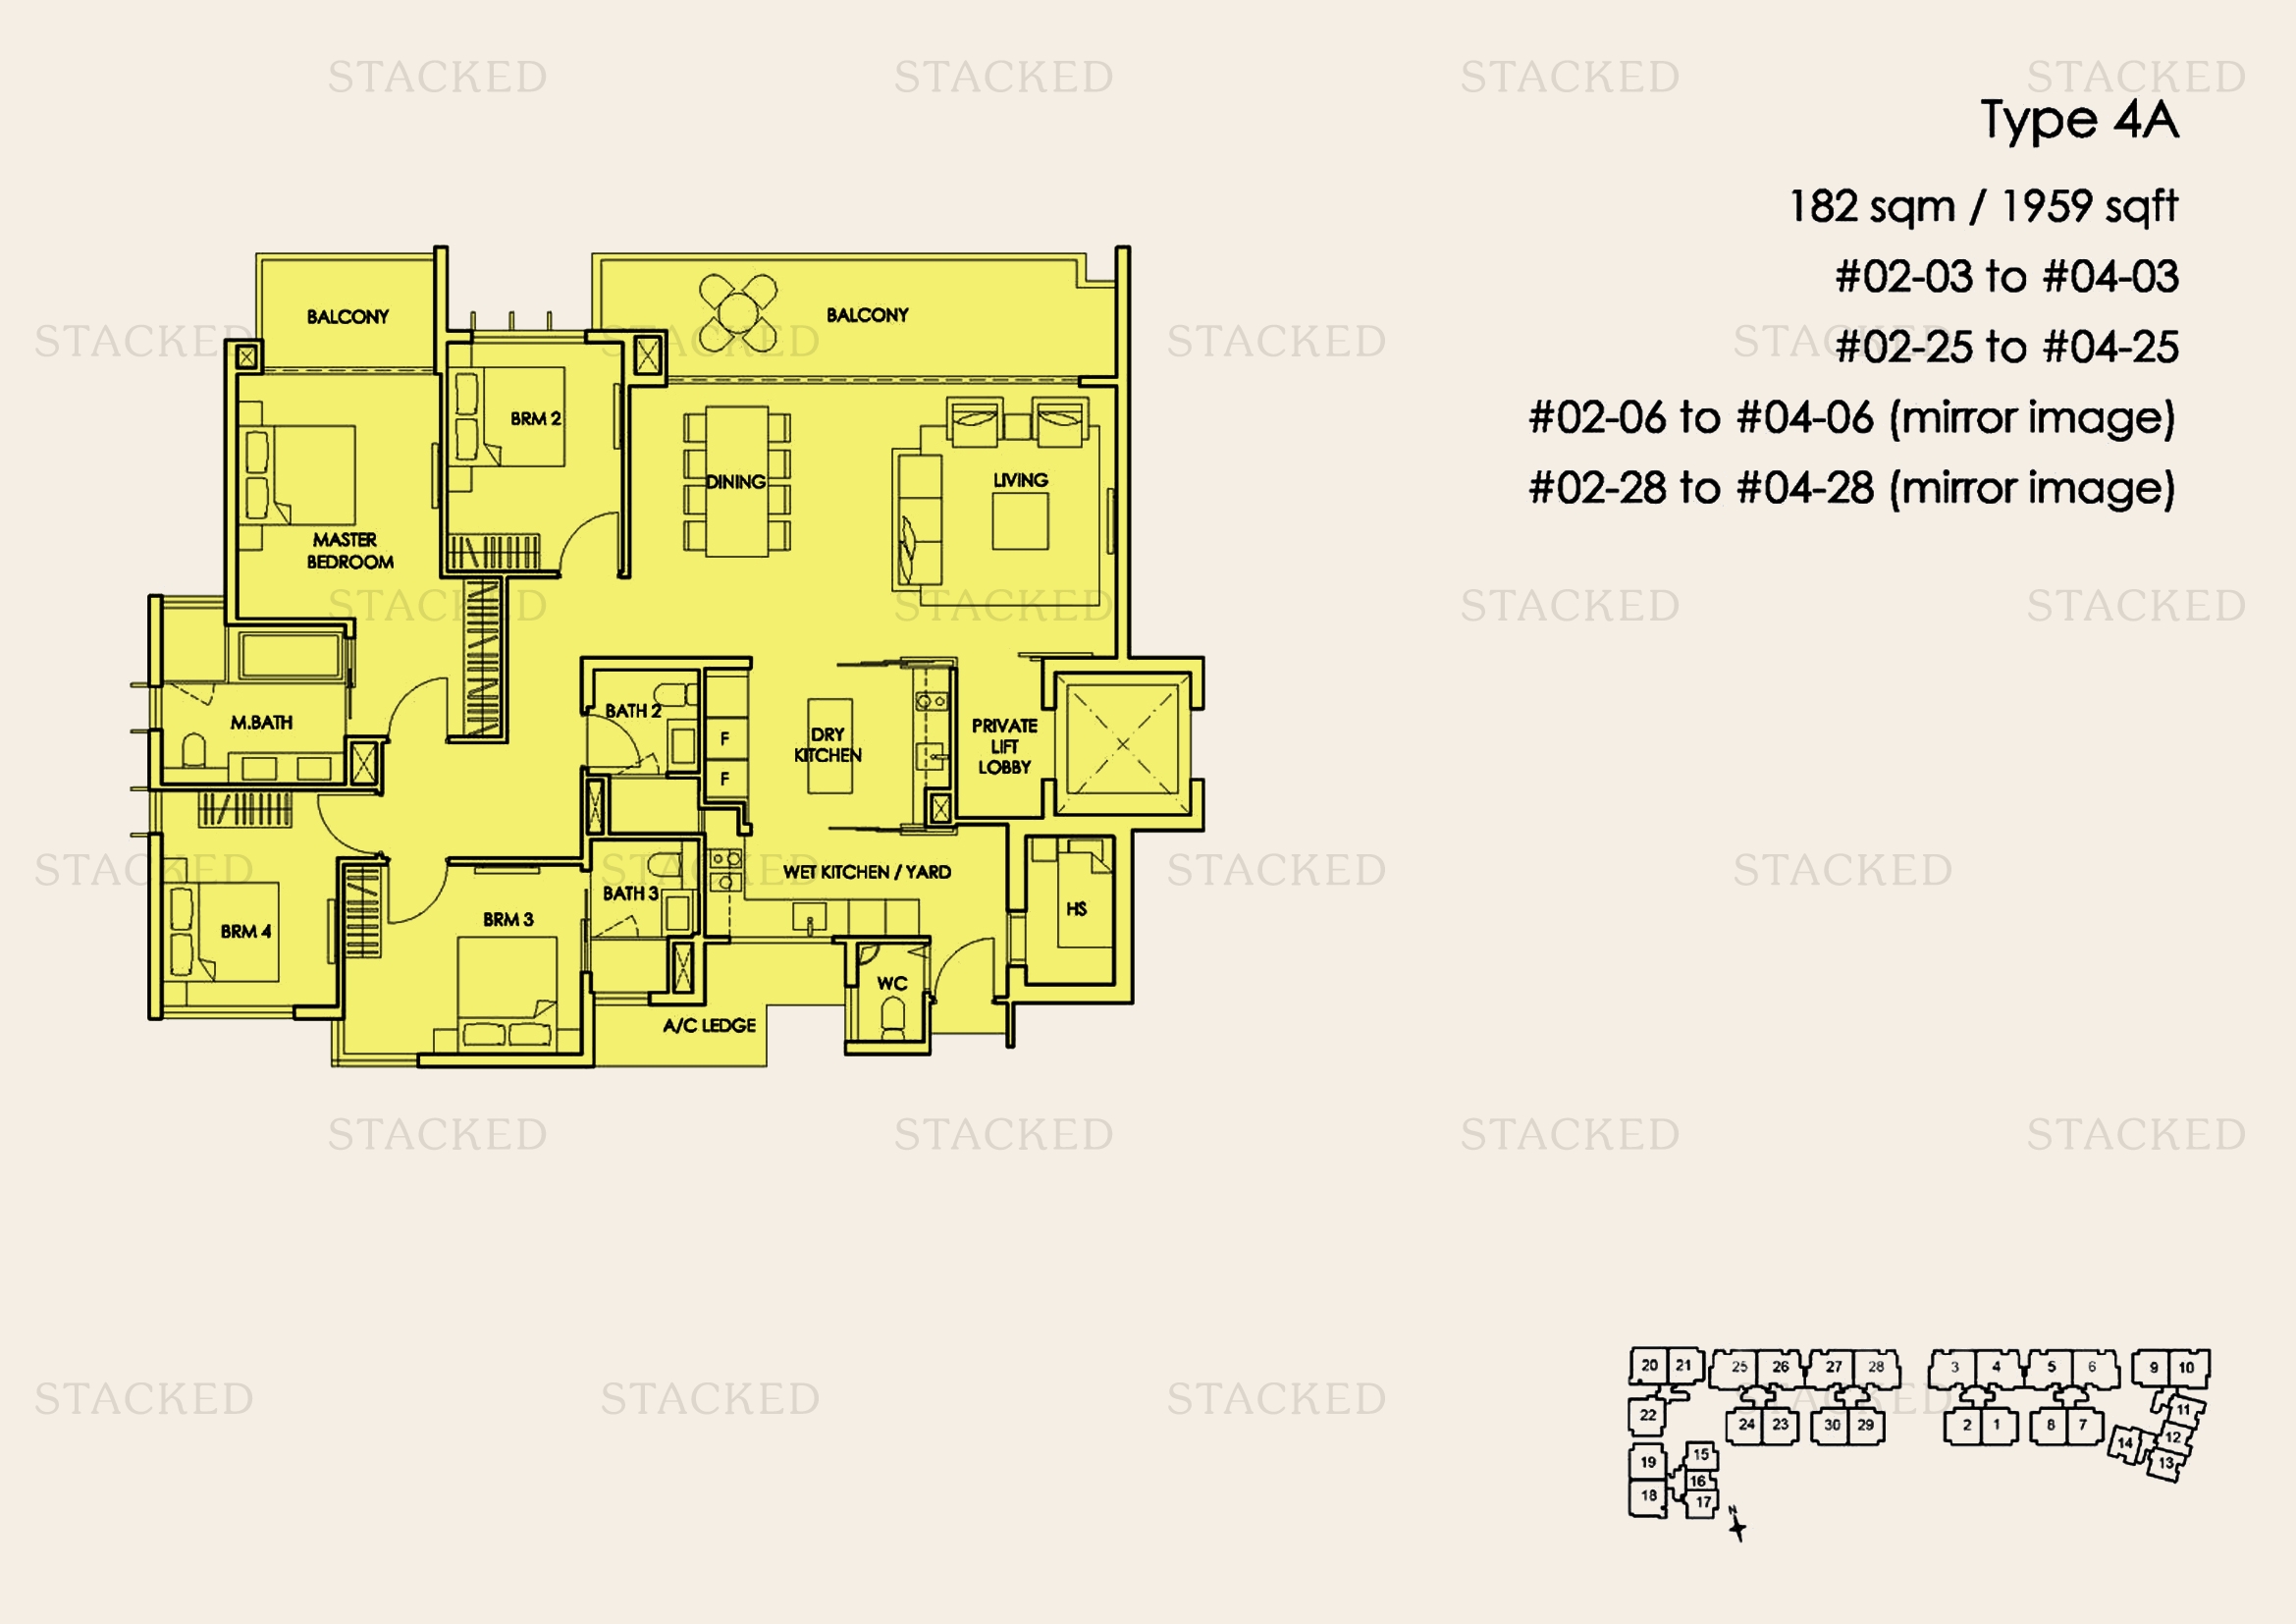 Stacked homes - The Glyndebourne Singapore Condo Floor Plans, Images ...